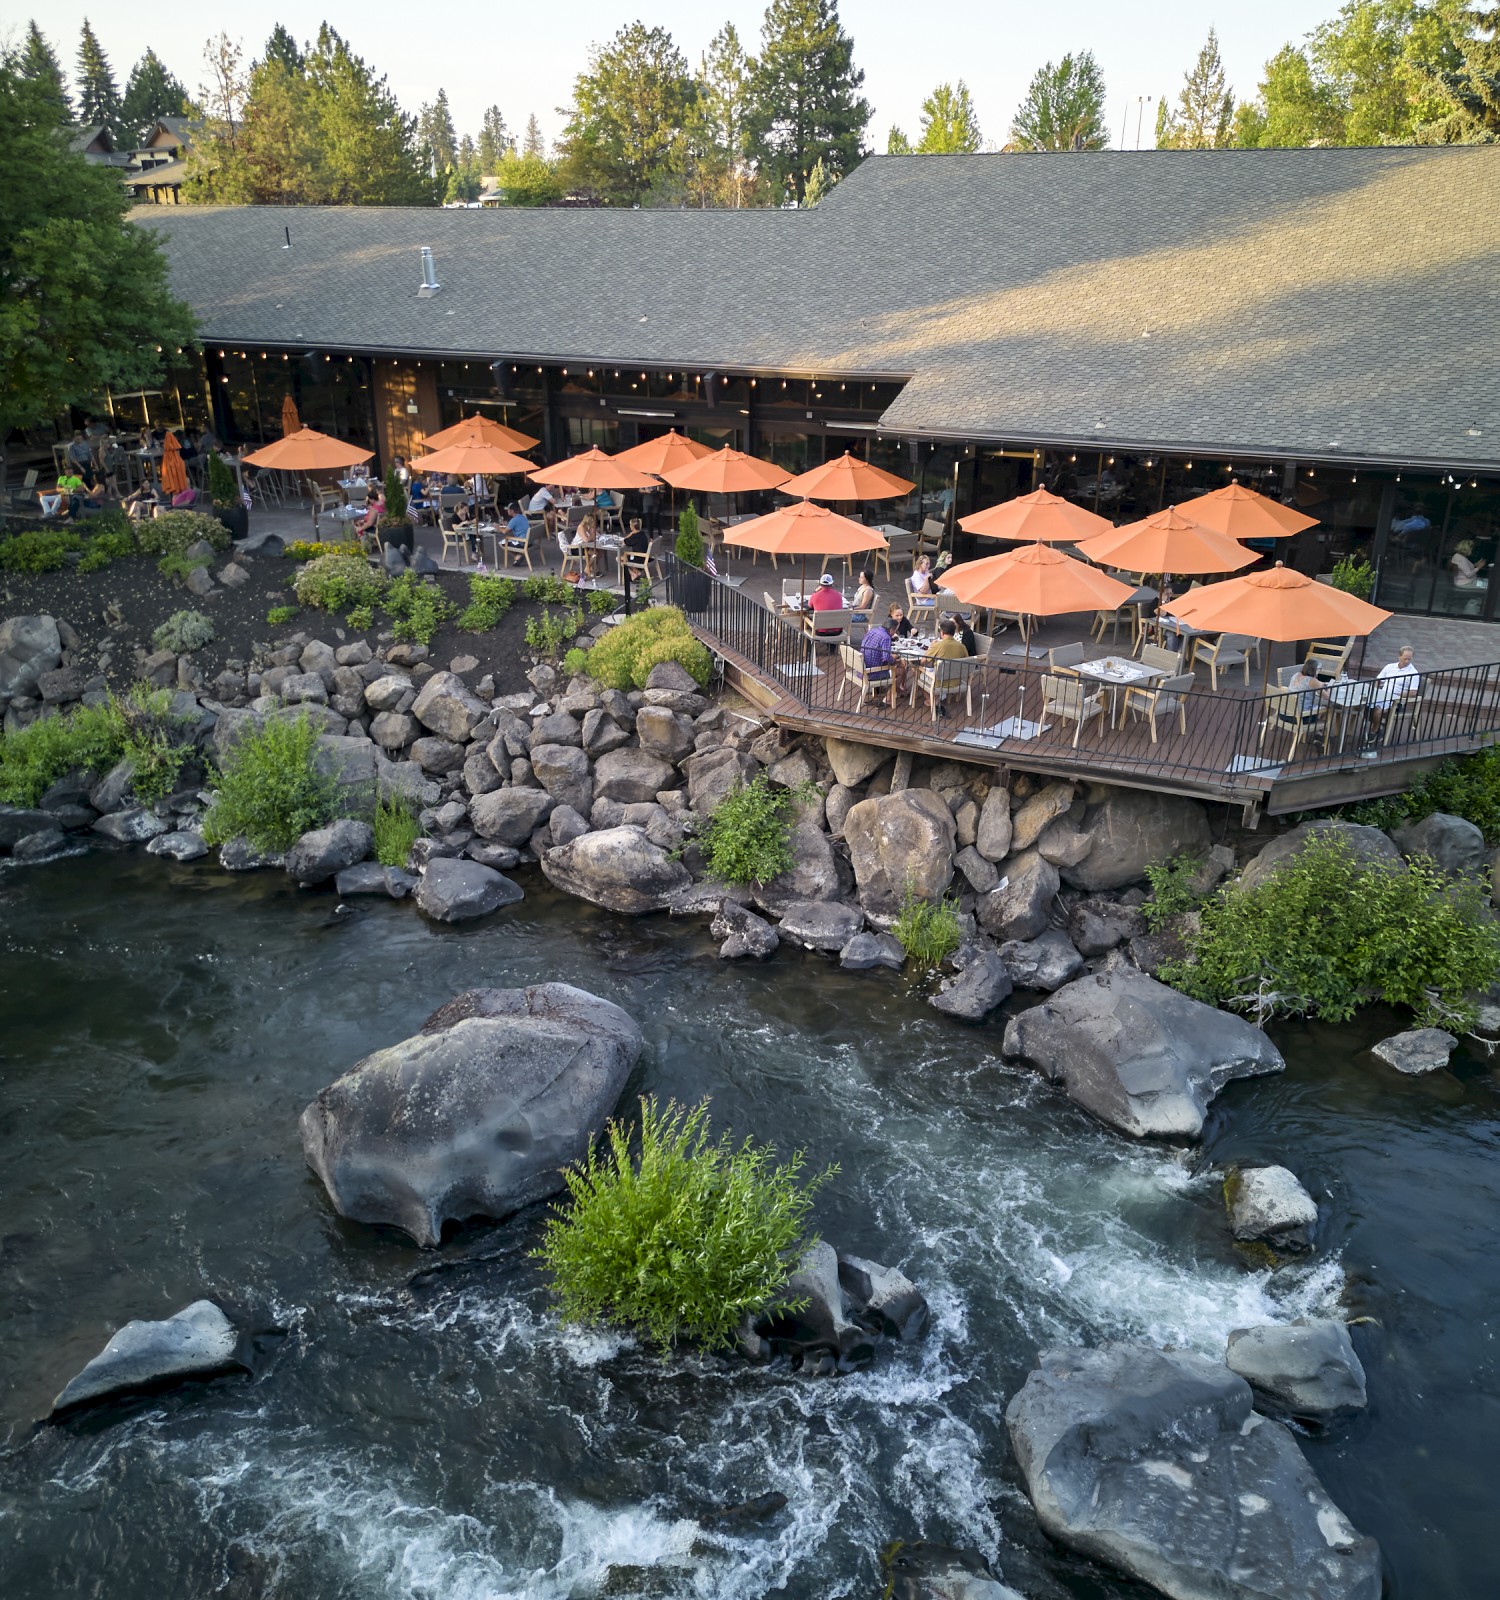 A riverside restaurant with outdoor seating under orange umbrellas, surrounded by trees and rocks, with a serene flowing river below.